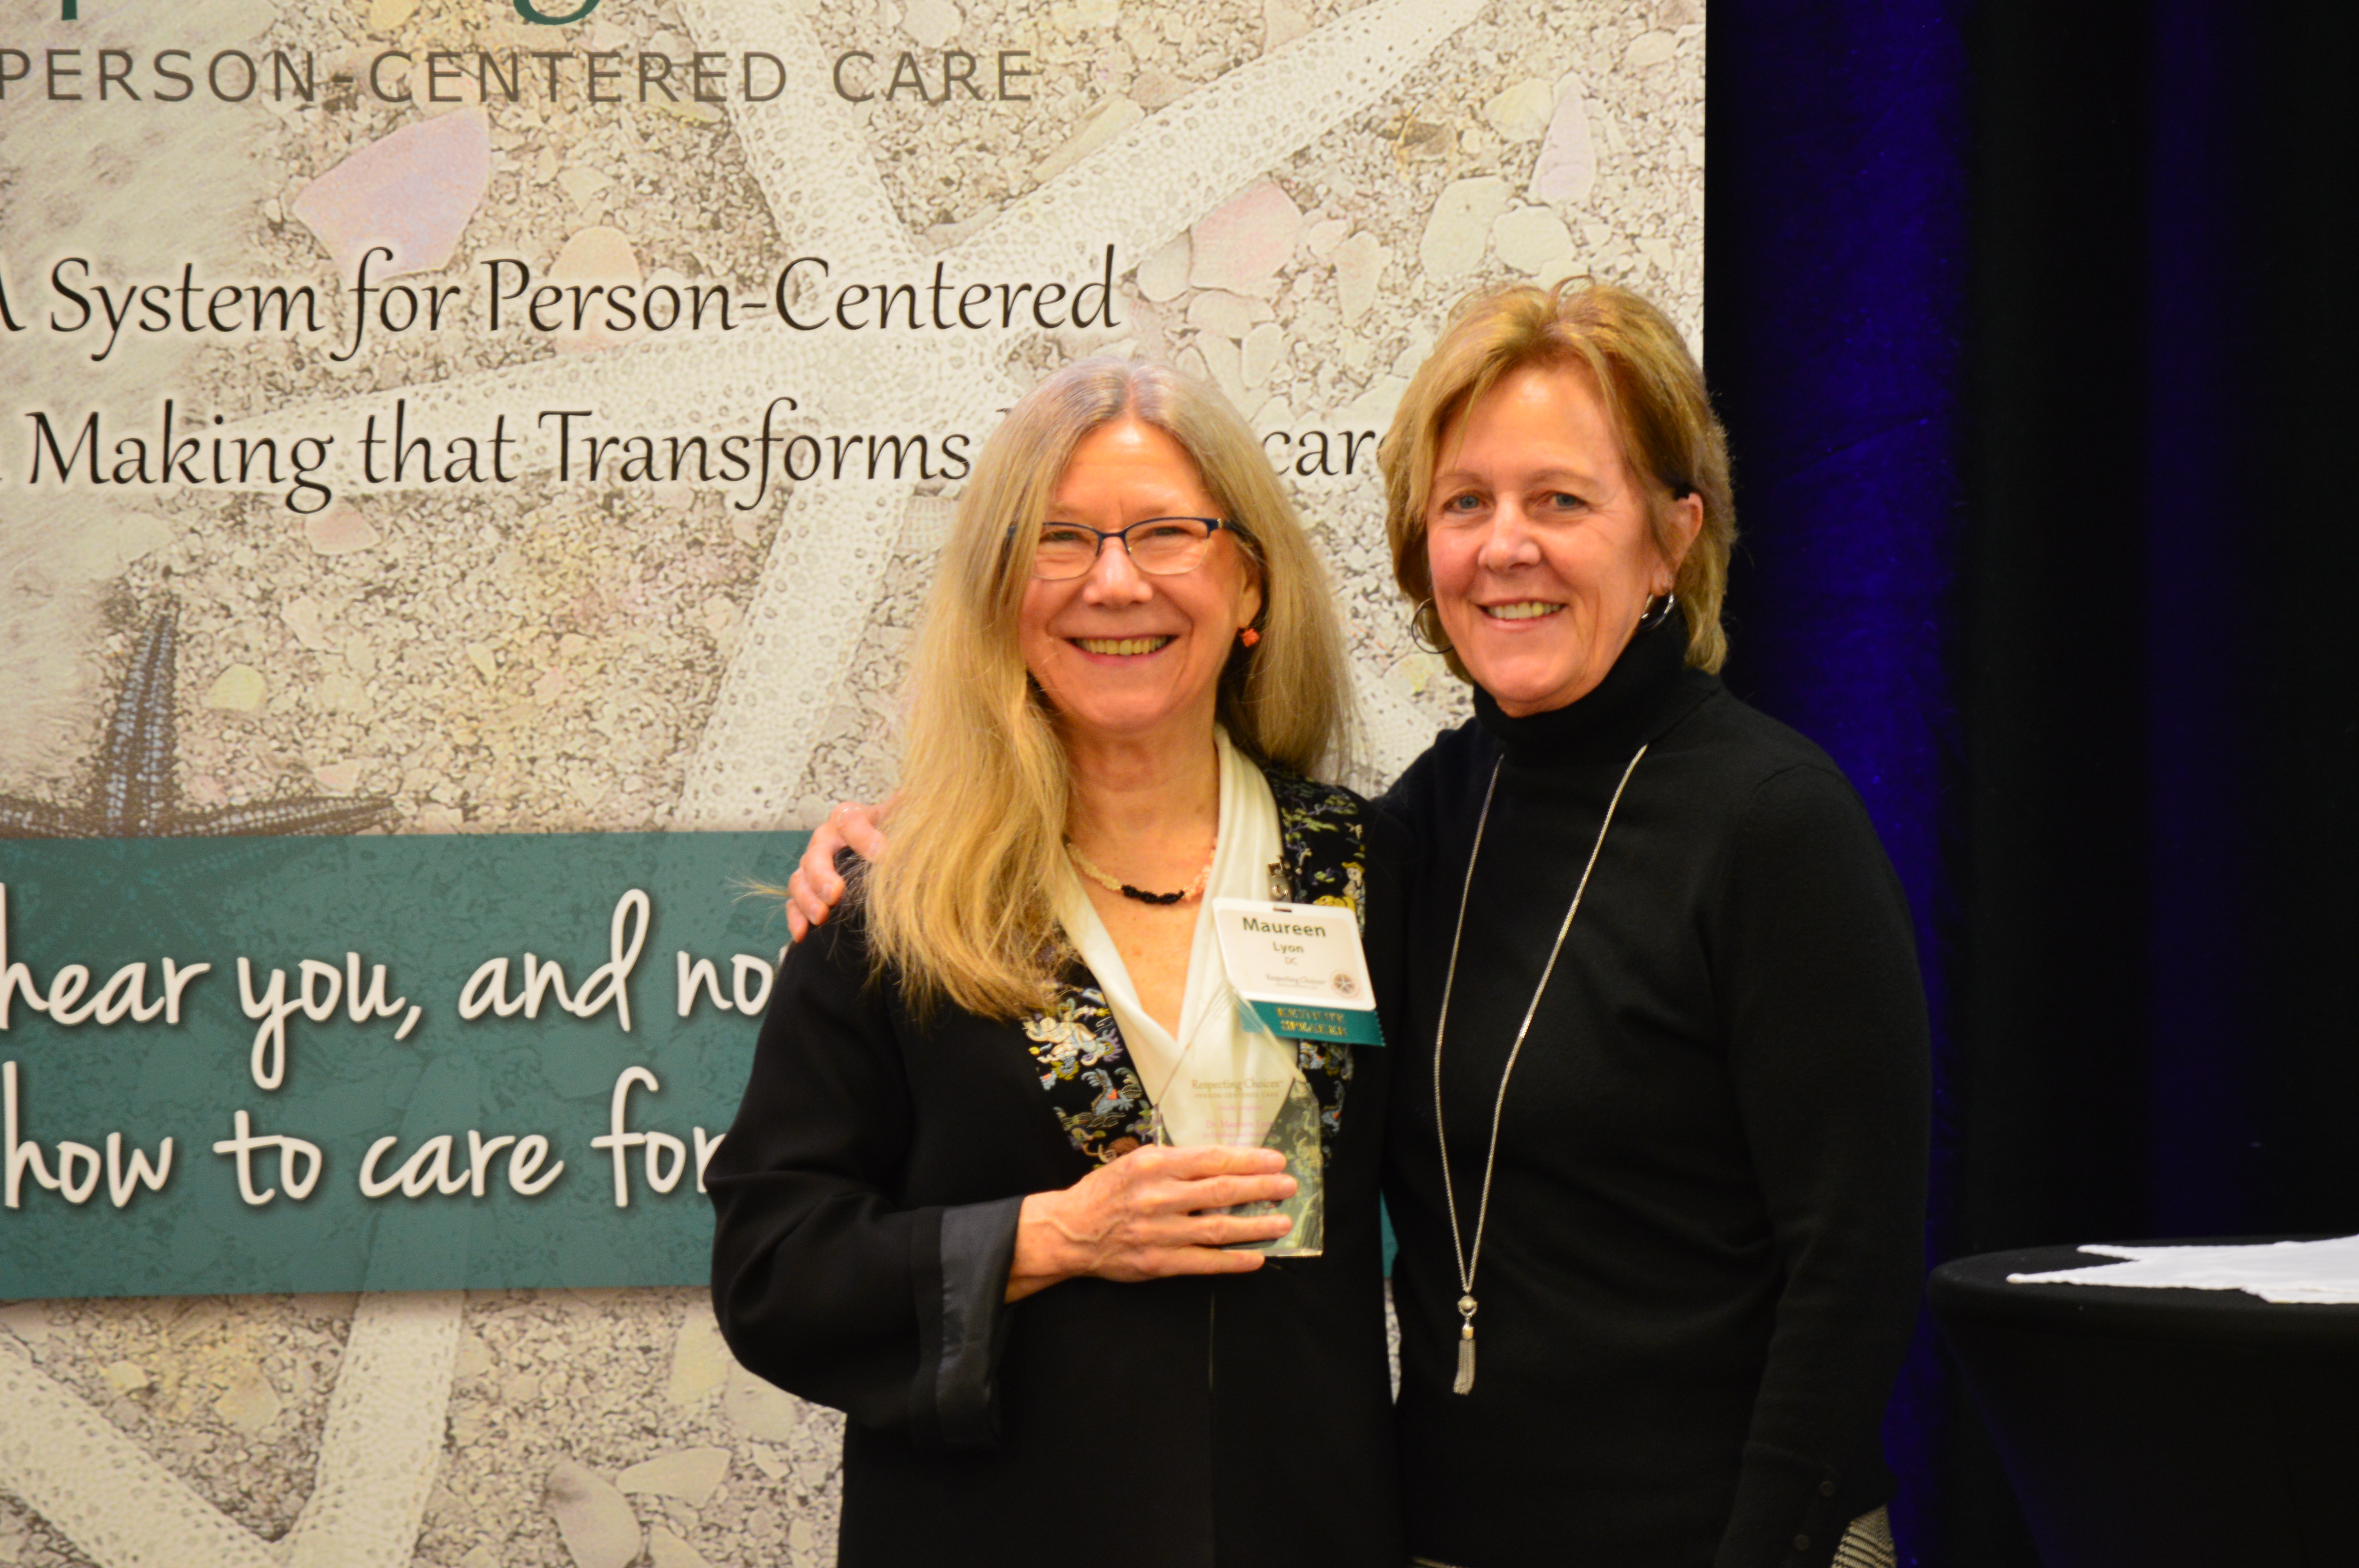 Excellence and Innovation in Research - Recipient: Dr. Maureen Lyon, Children’s National Health System – Washington, D.C. | Pictured from L-R: Linda Briggs (RC), Maureen Lyon